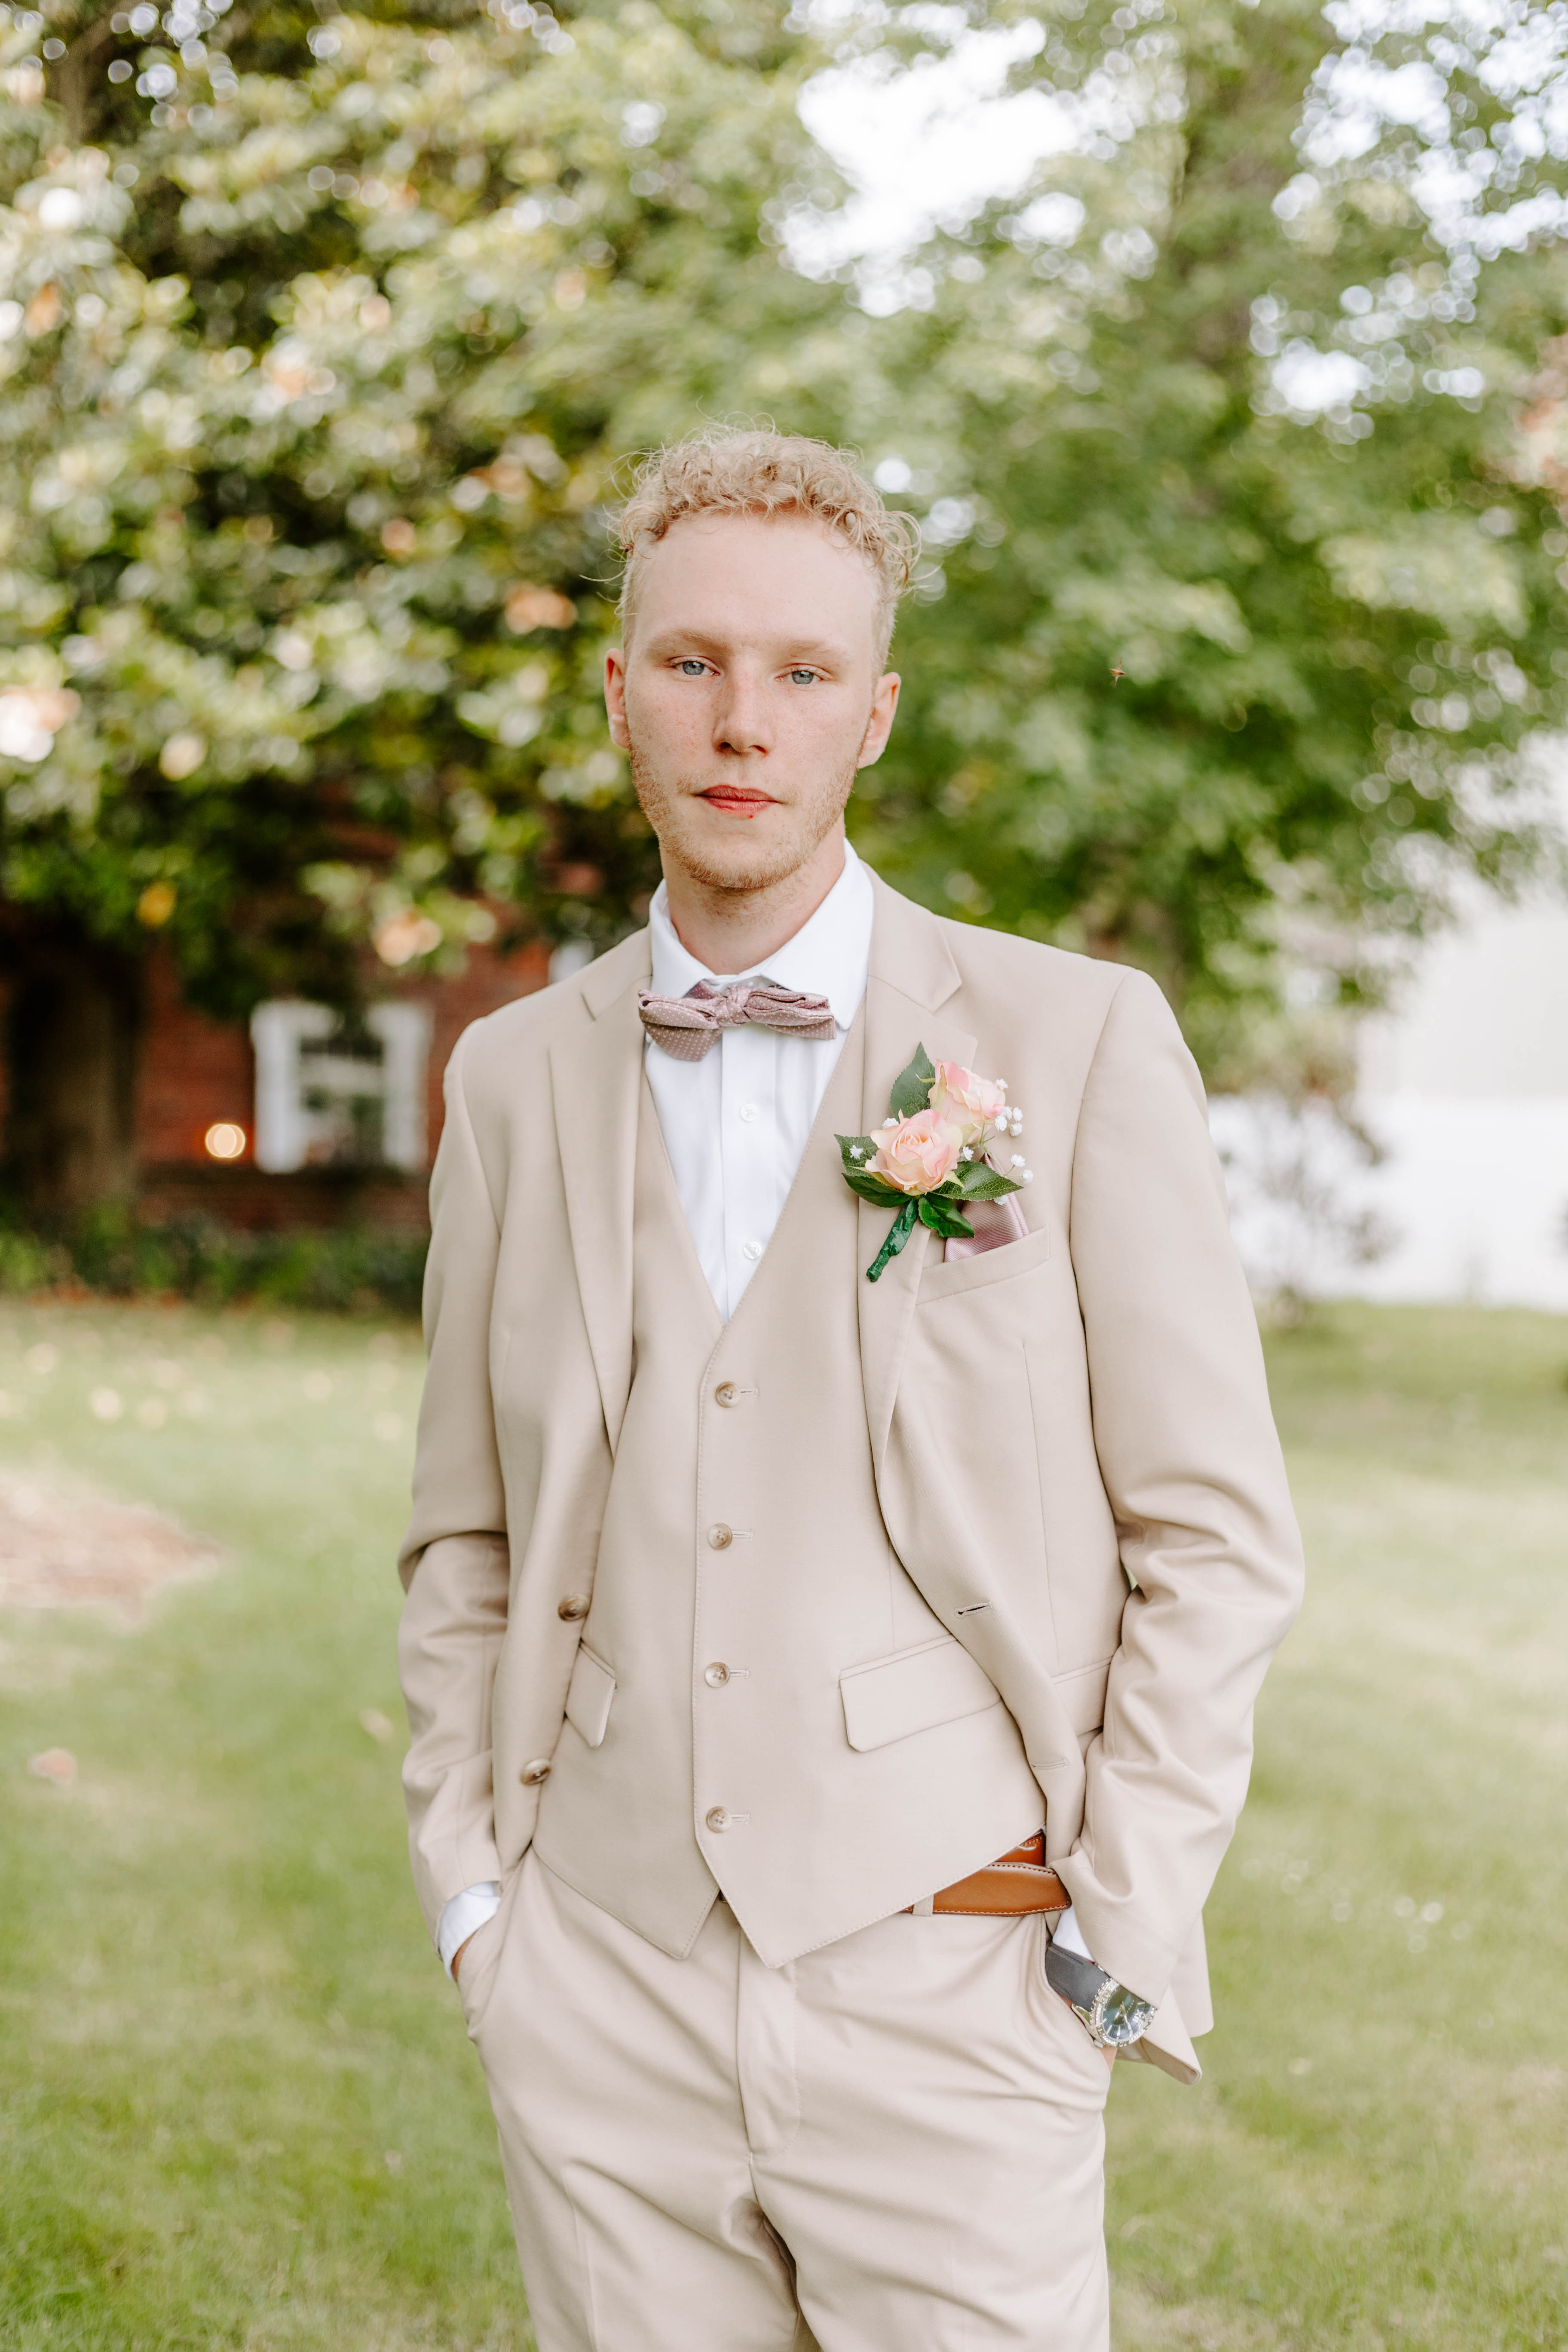 Individual groom portrait at spring wedding in Delaware  at Historic Odessa. Delaware wedding photographer Alli McGrath photographed this candid moment.